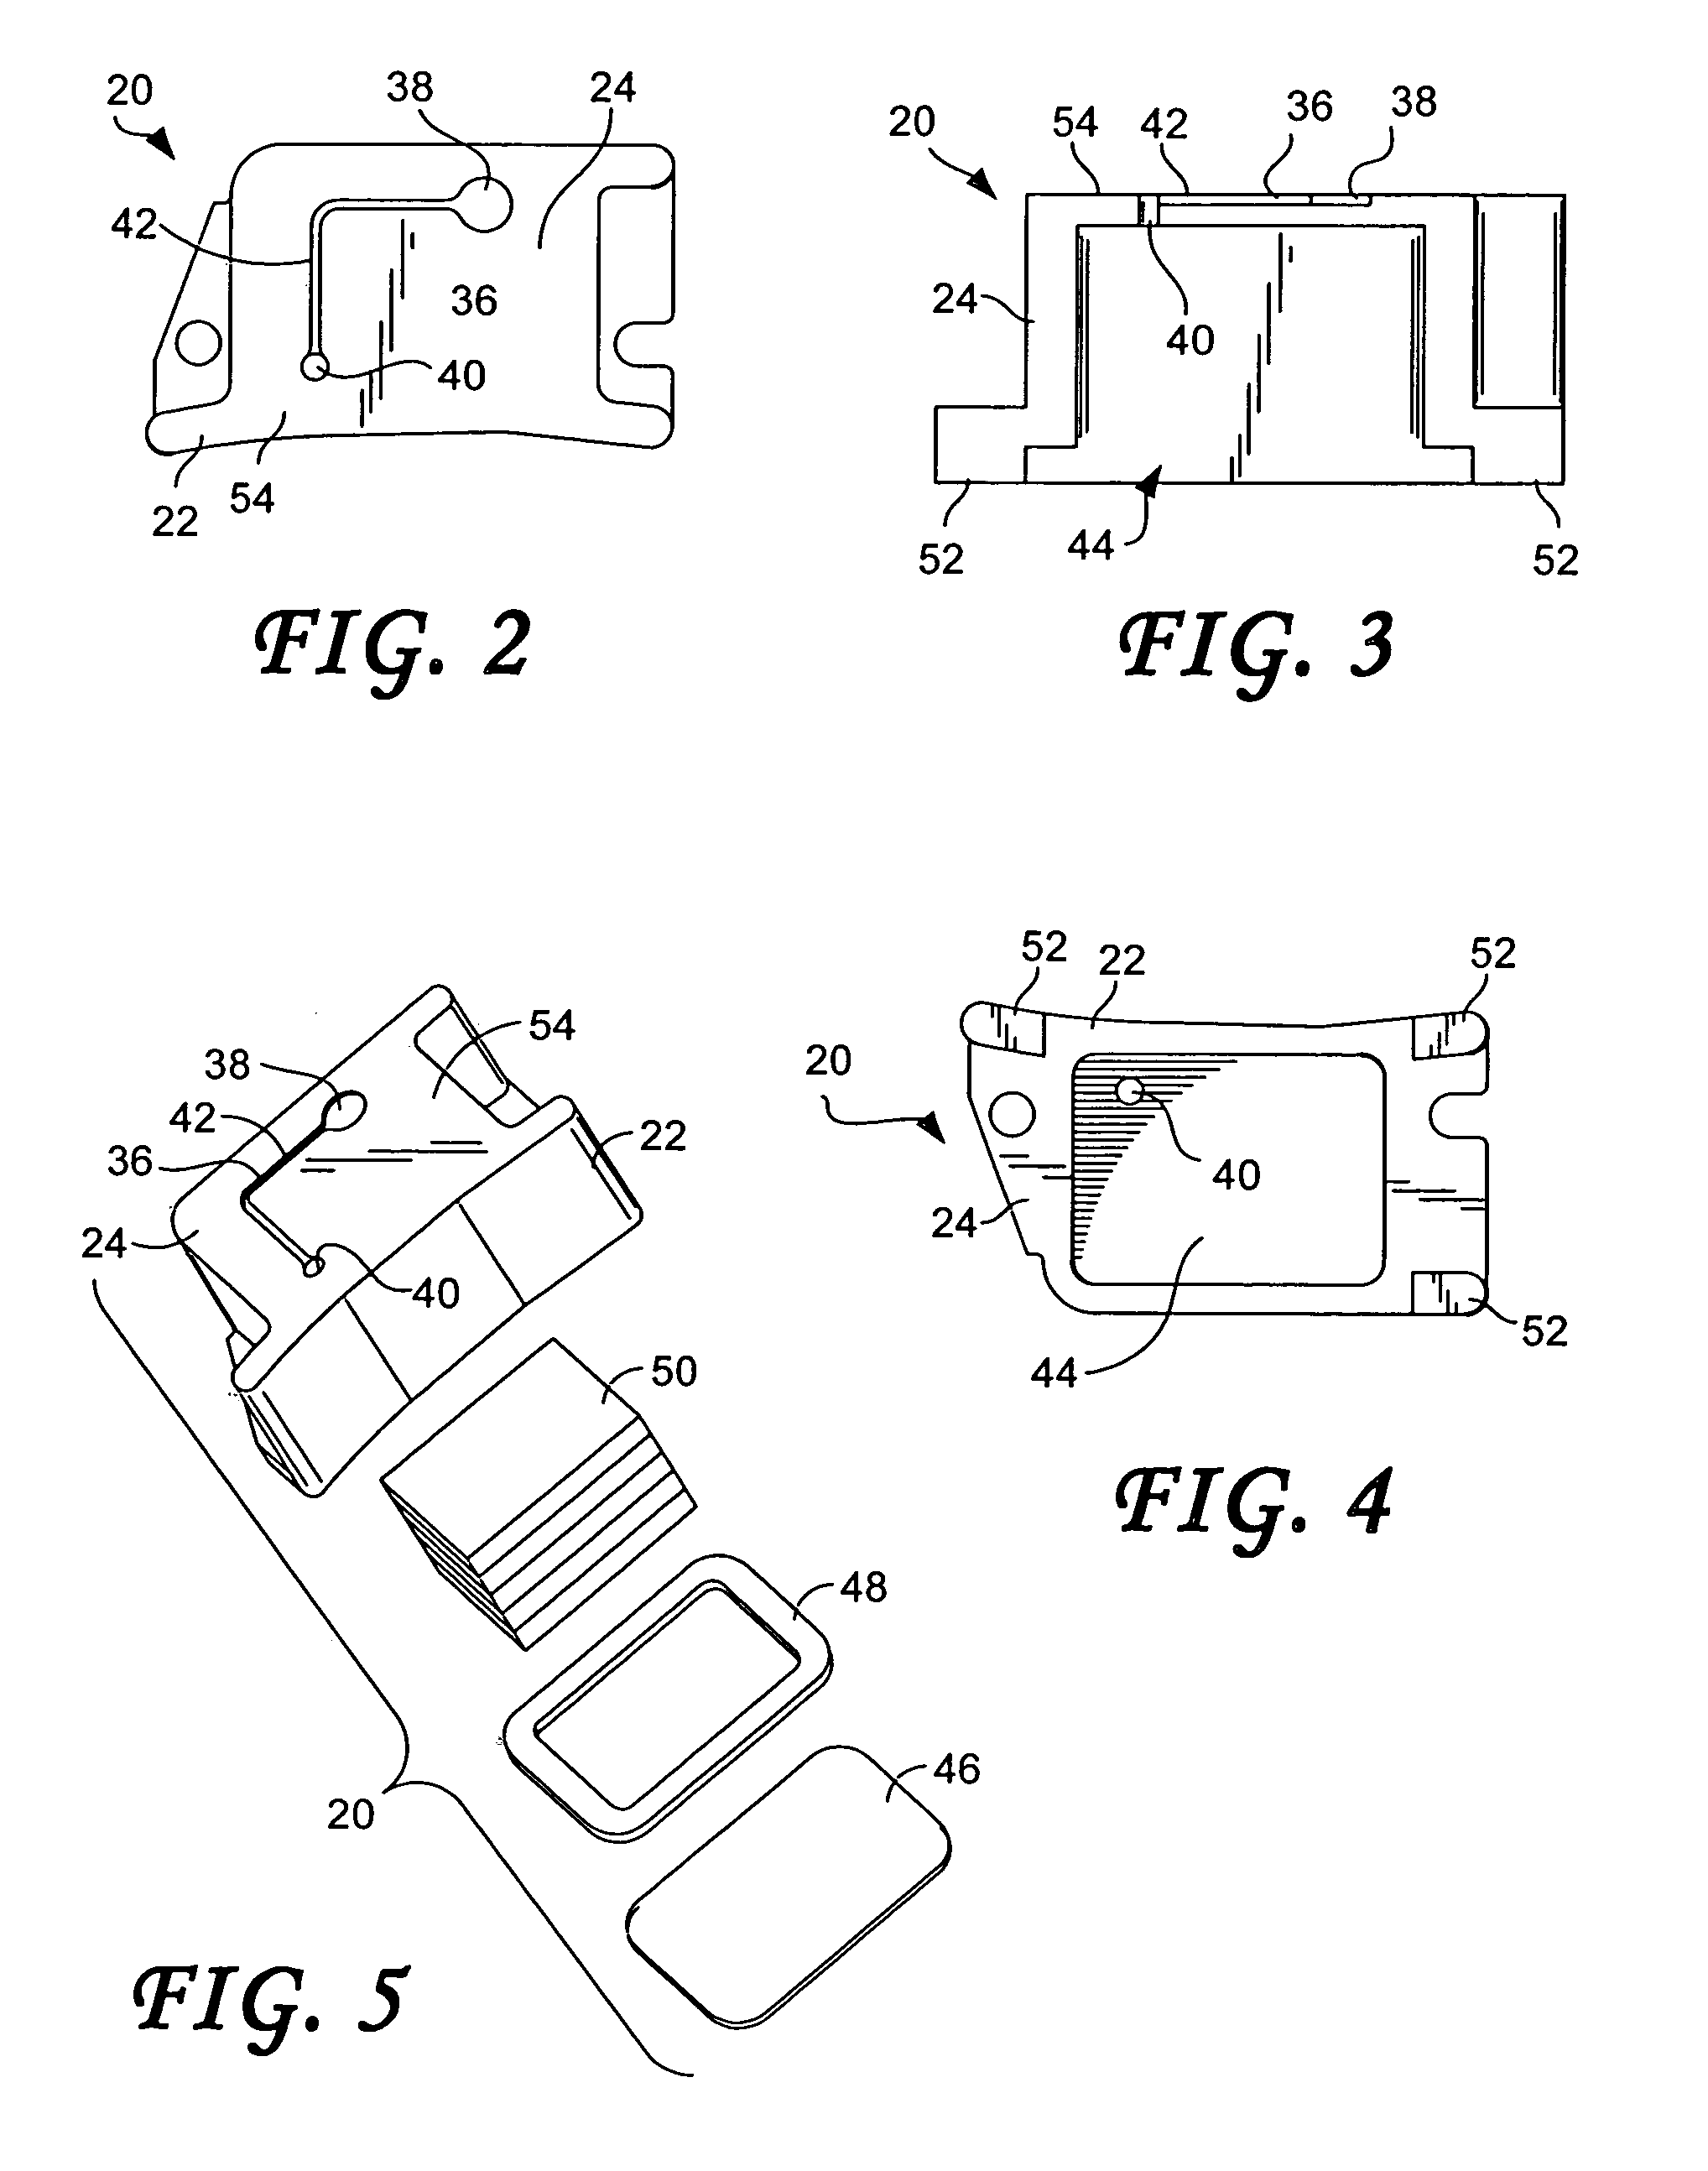 Disk drive having a disk drive component adhered to the disk drive housing via an adhesive assembly having a leveling layer